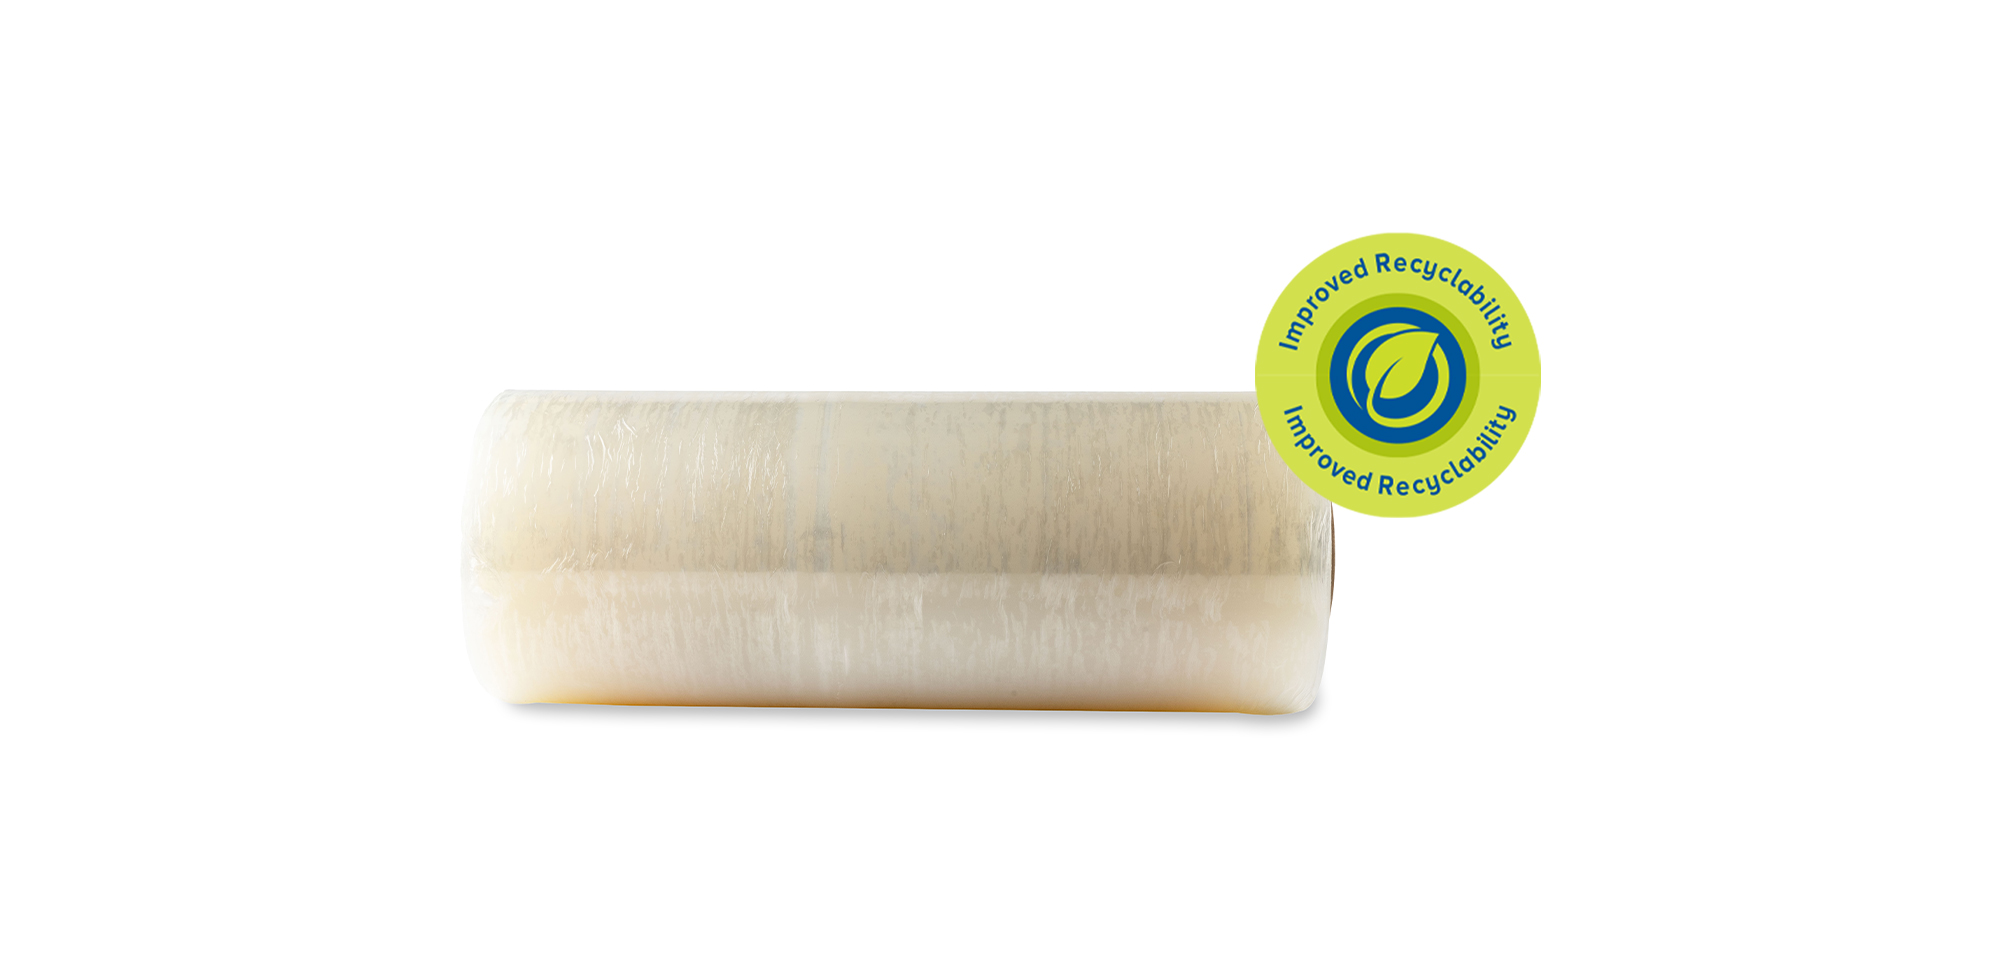 Berry Launches Breakthrough Technology in Cling Film, Providing a Certified Recyclable Alternative to PVC Films